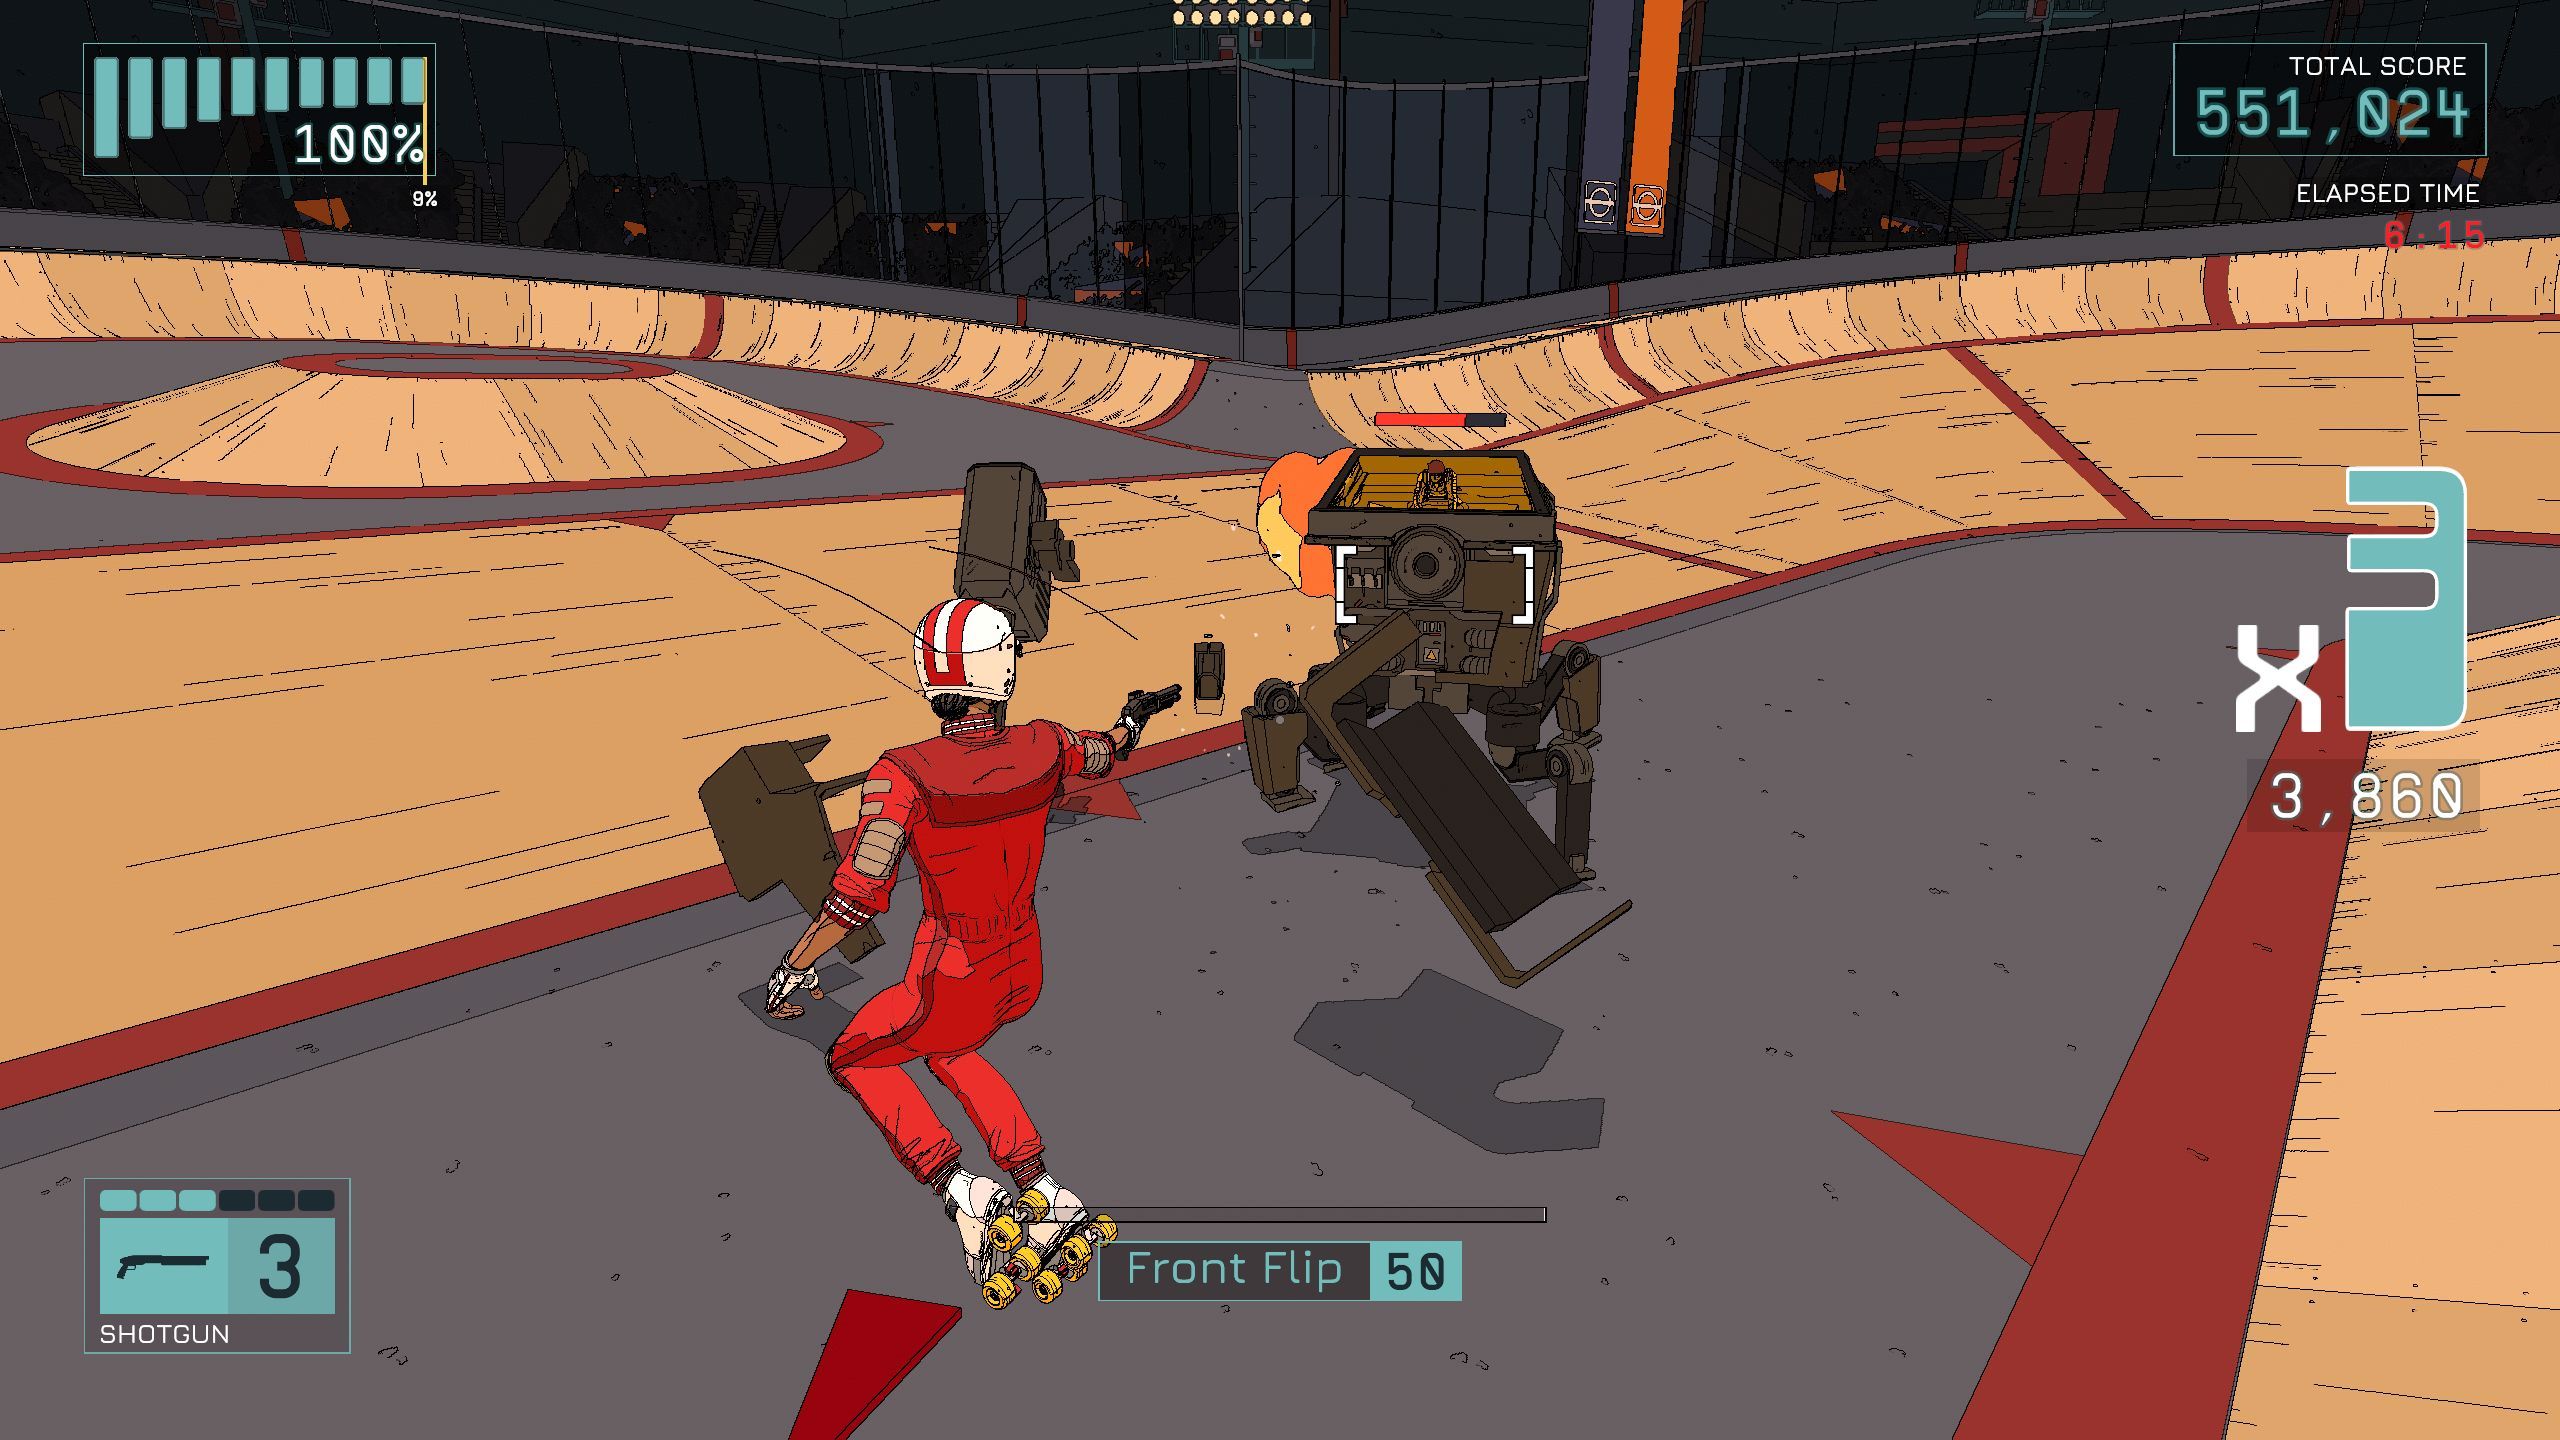 A woman in a red jump suit fires a gun in midair at a robot sentry in Rollerdrome